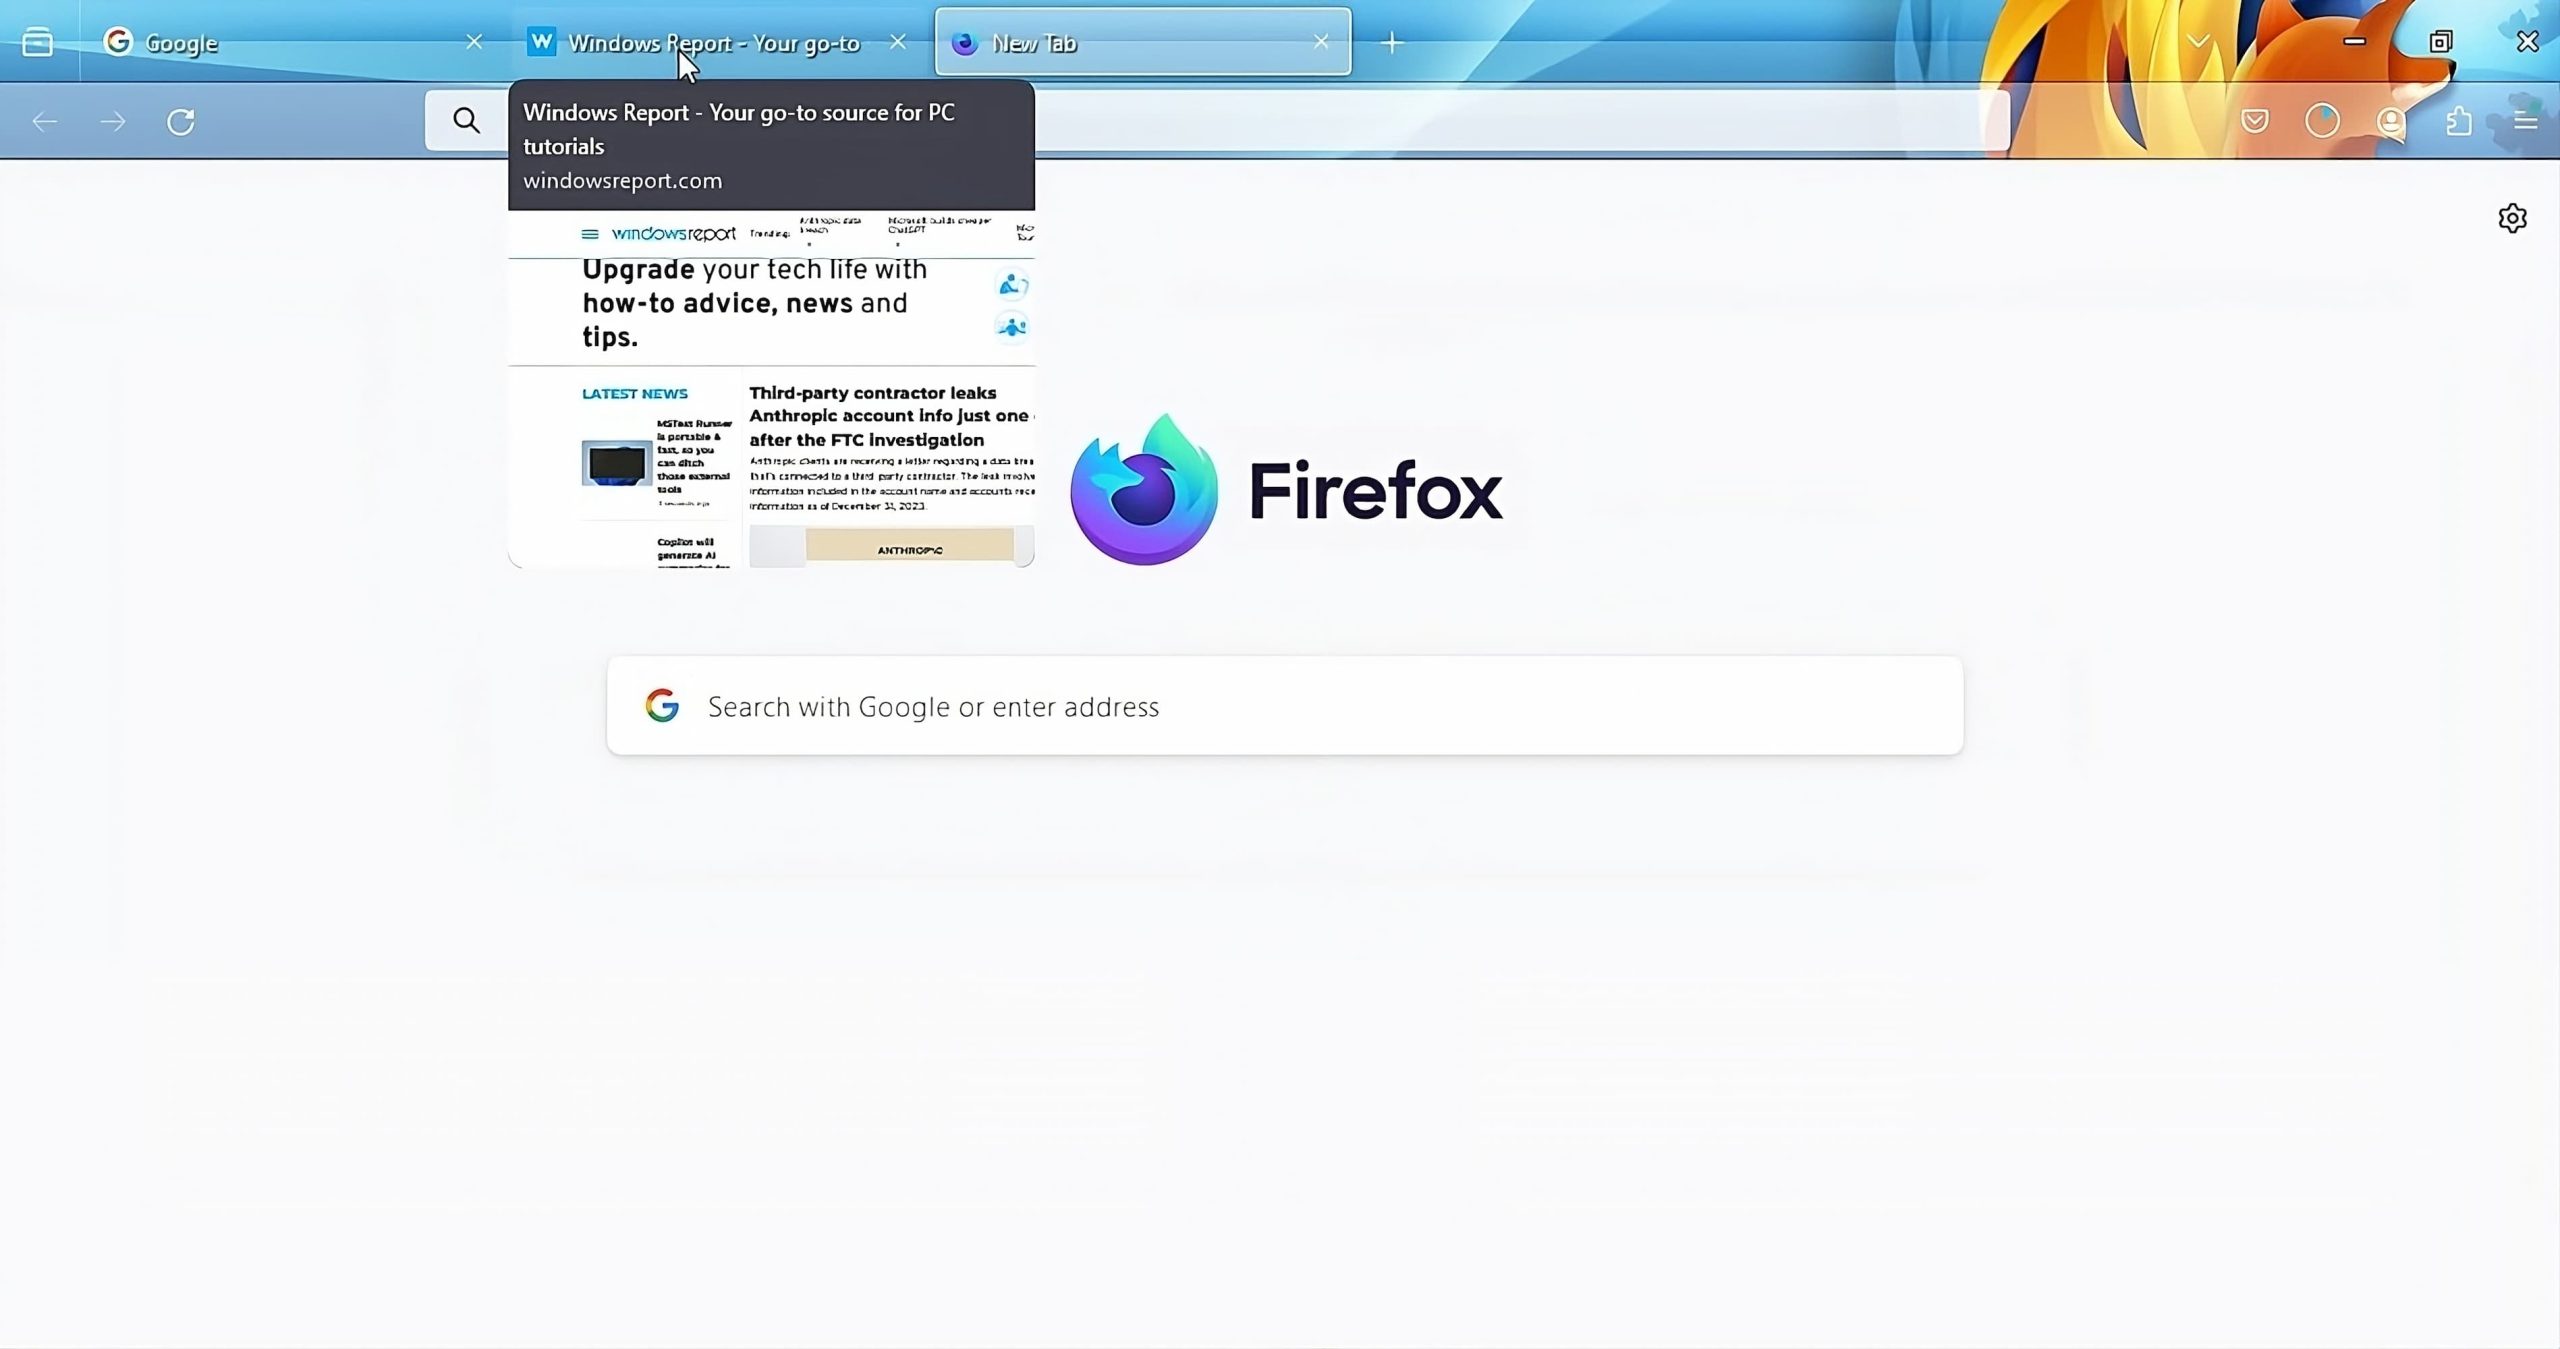 Mozilla Firefox finally supports tab hover previews